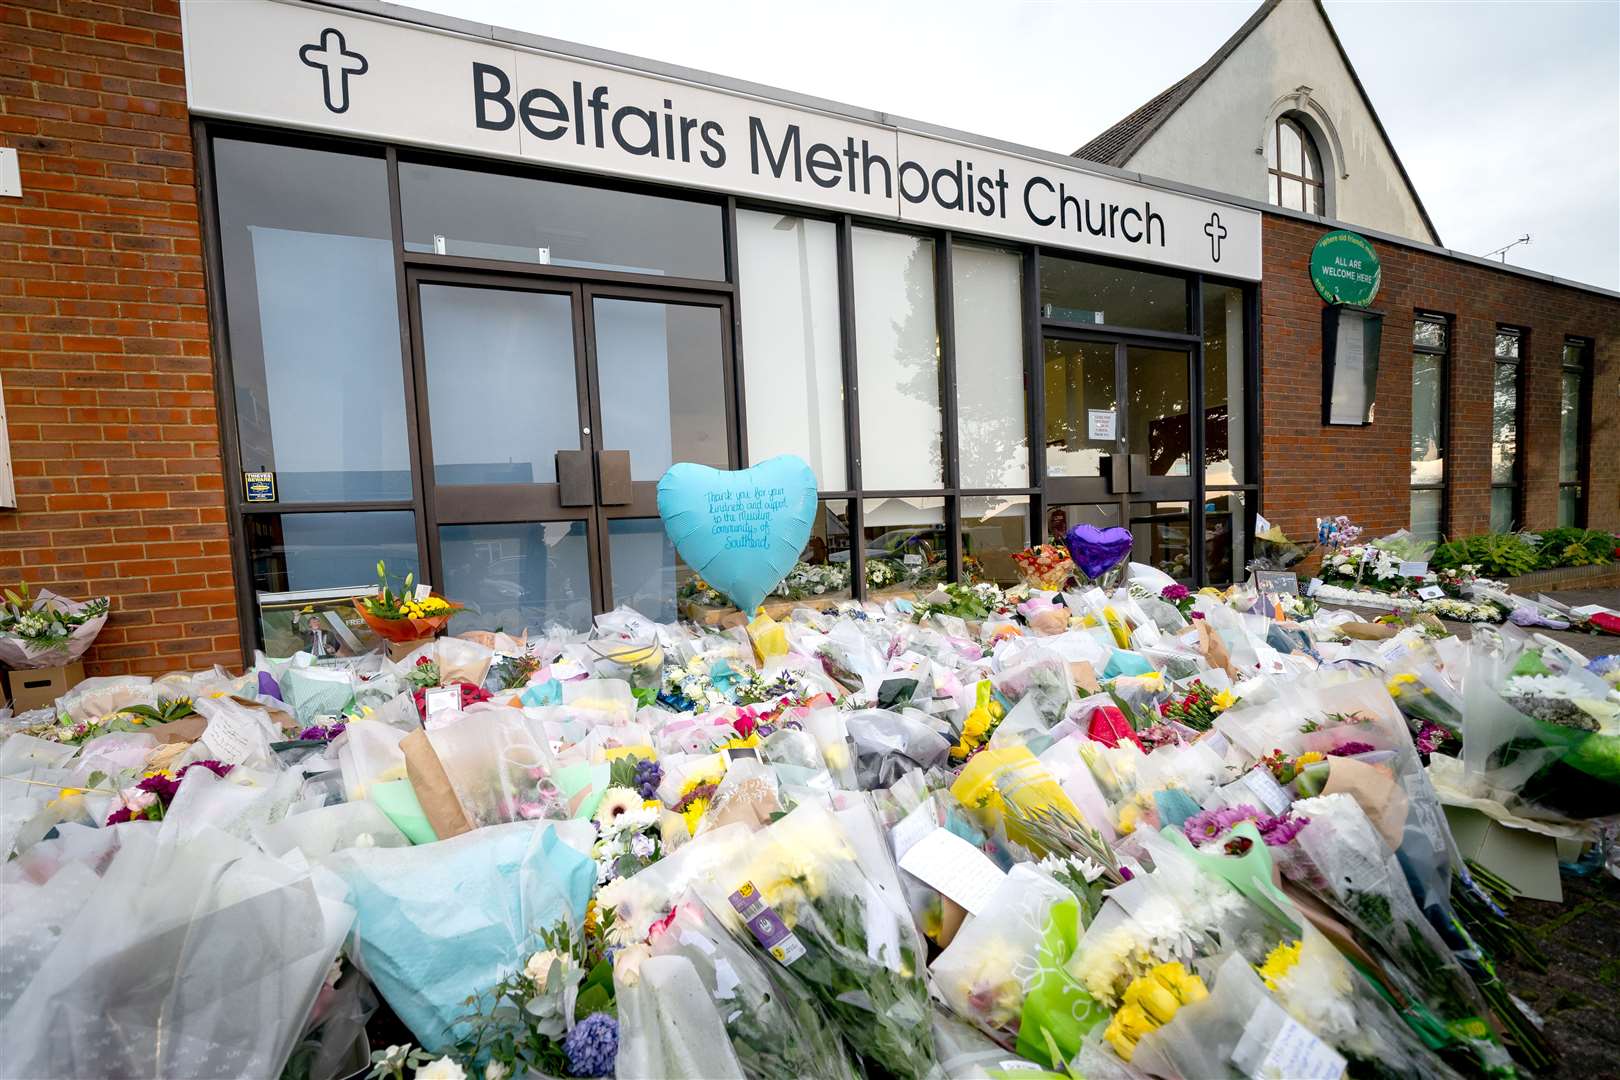 Floral tributes to Sir David were left at Belfairs Methodist Church before they were moved to his constituency office (Aaron Chown/PA)